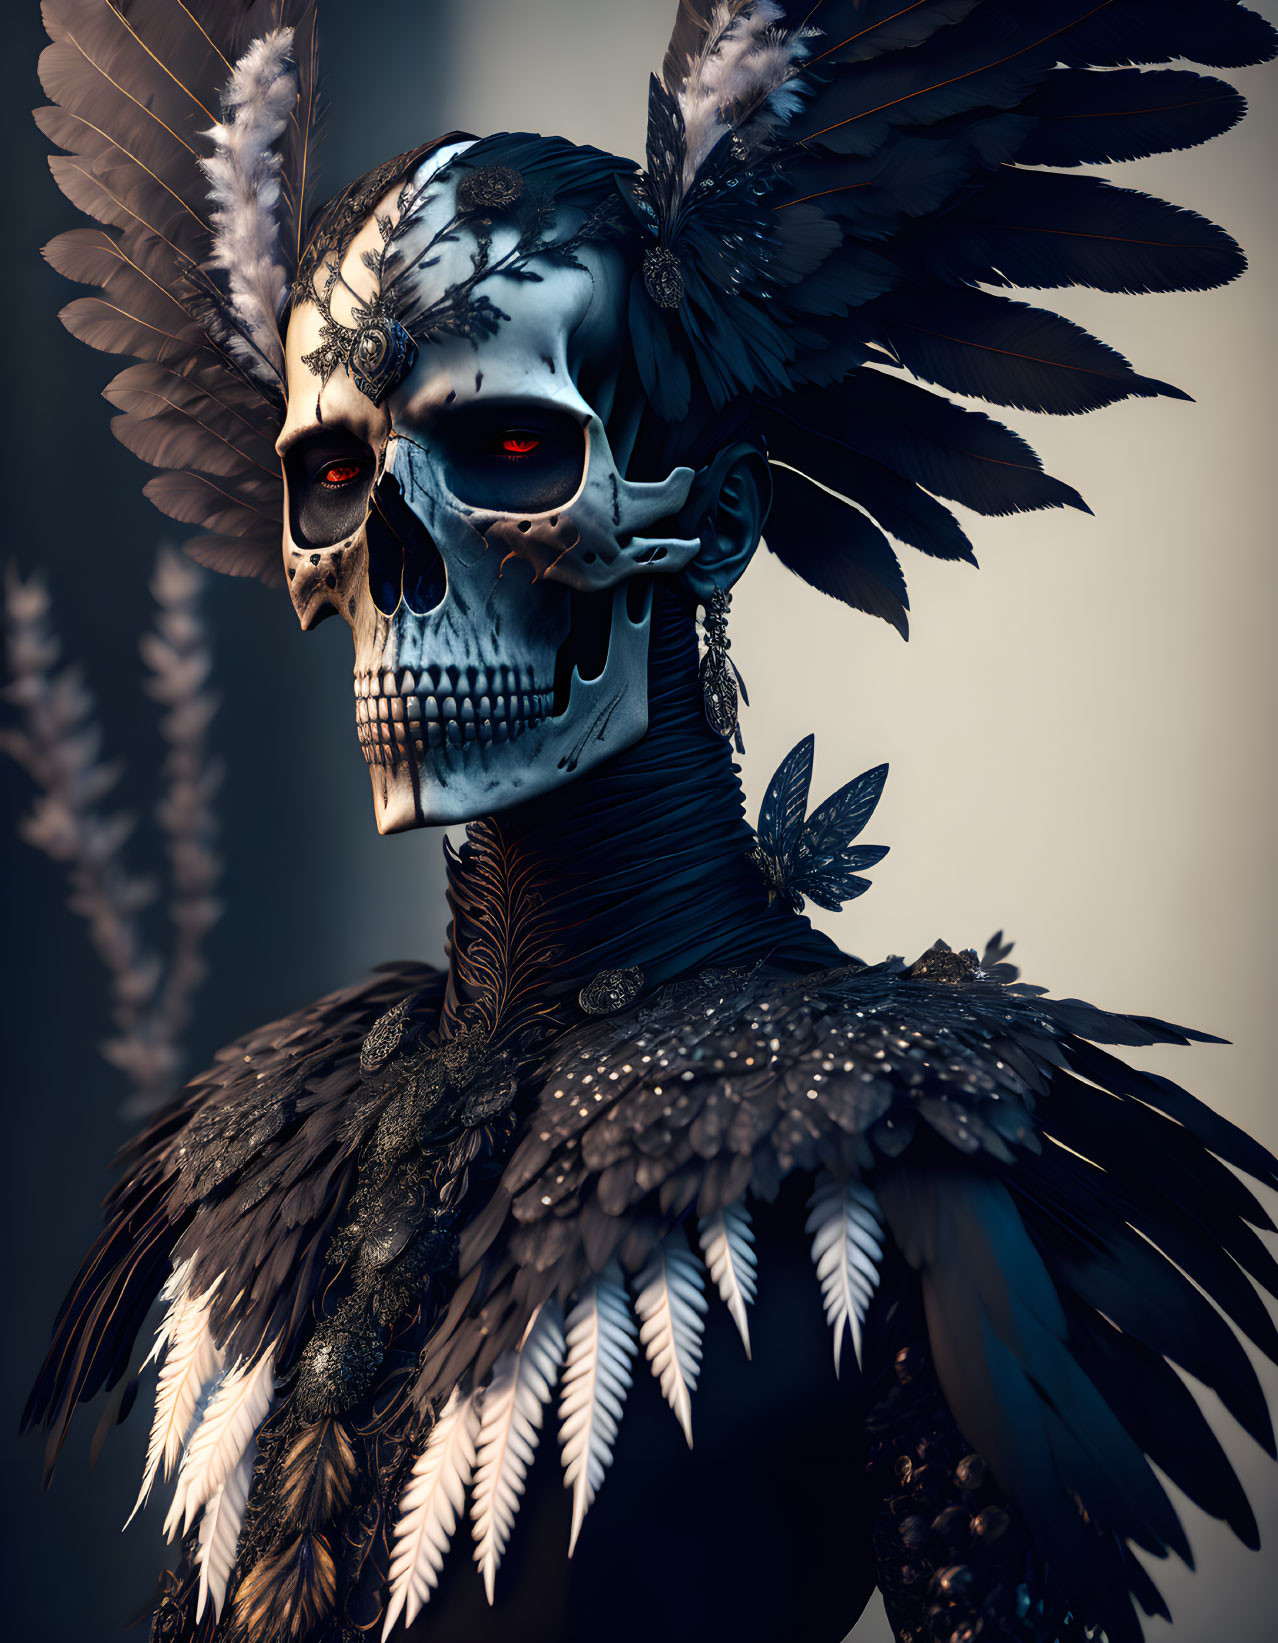 Skeleton adorned with feathers and tribal patterns for a mystical look